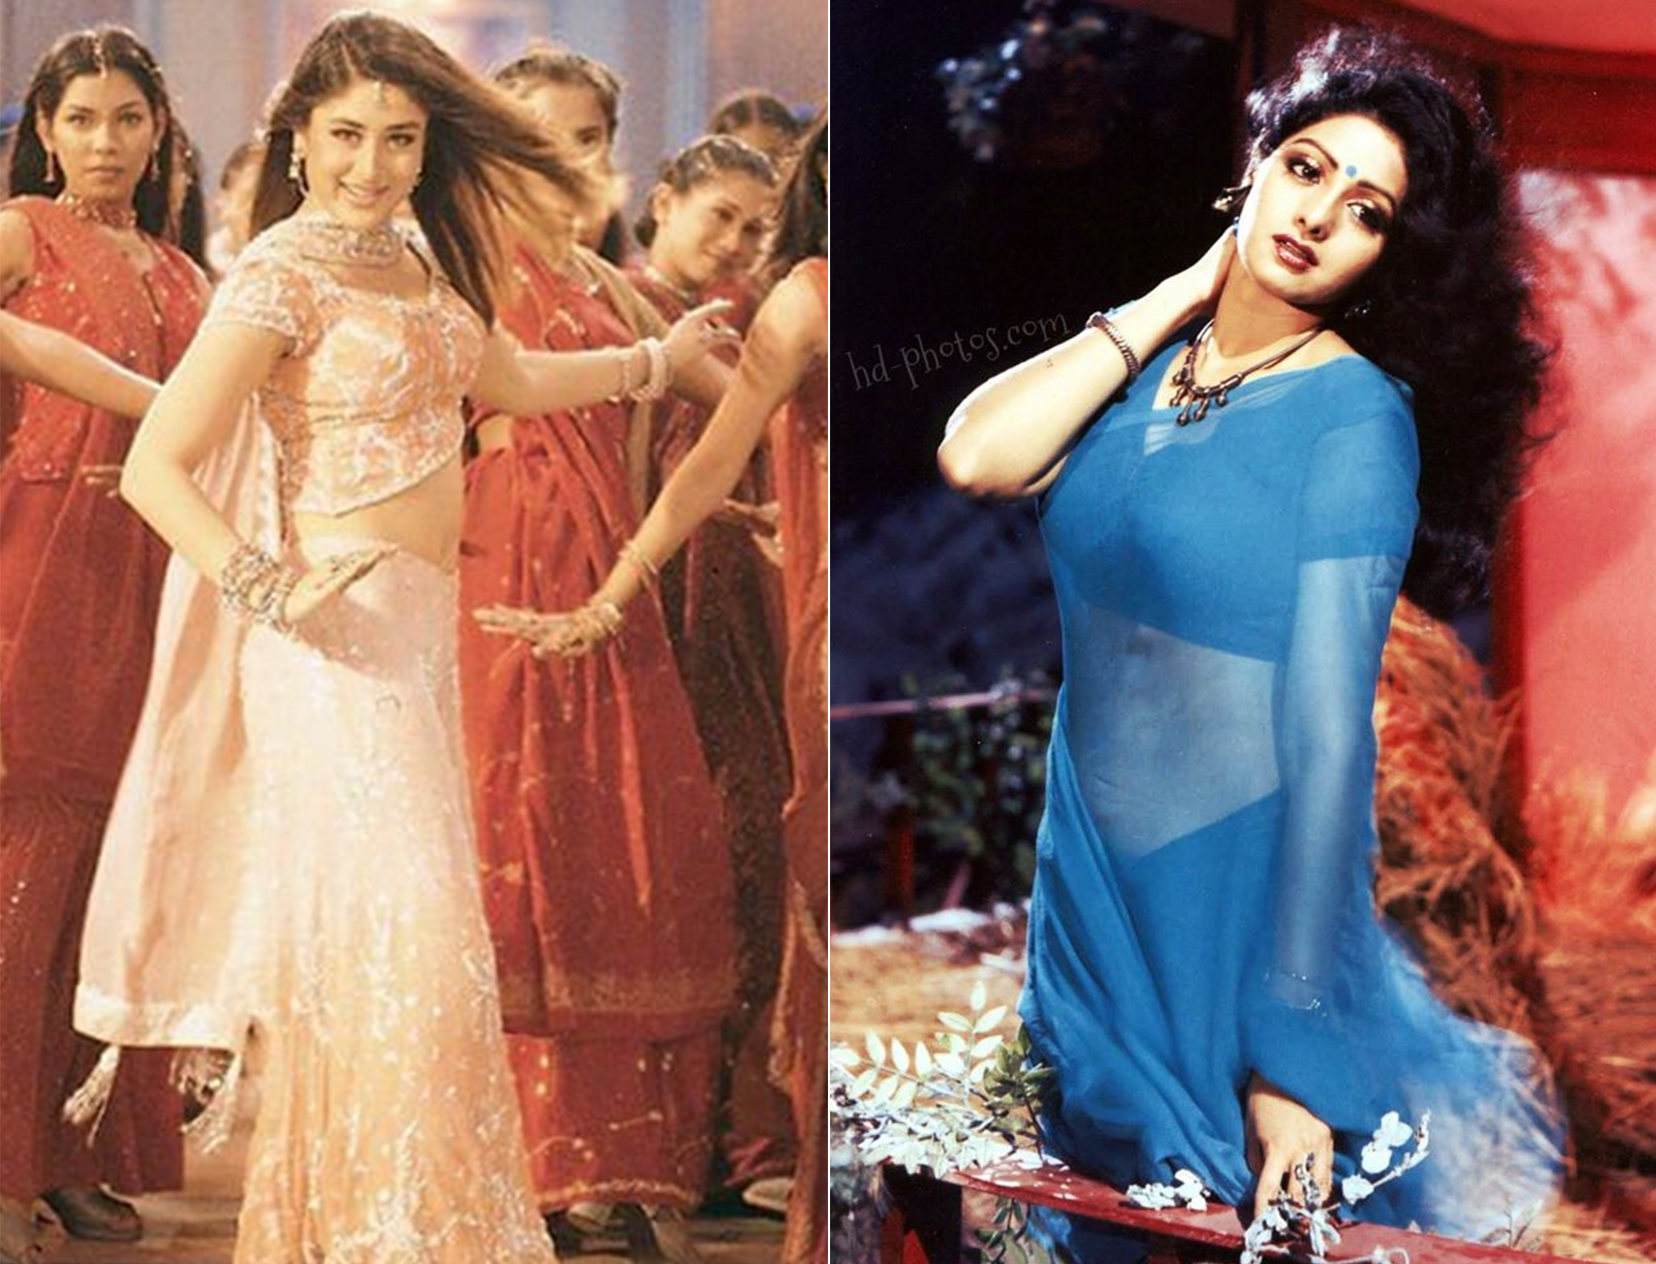 12 Outfits Actresses Wore In Bollywood Movies That I Would LOVE To Add To My Closet